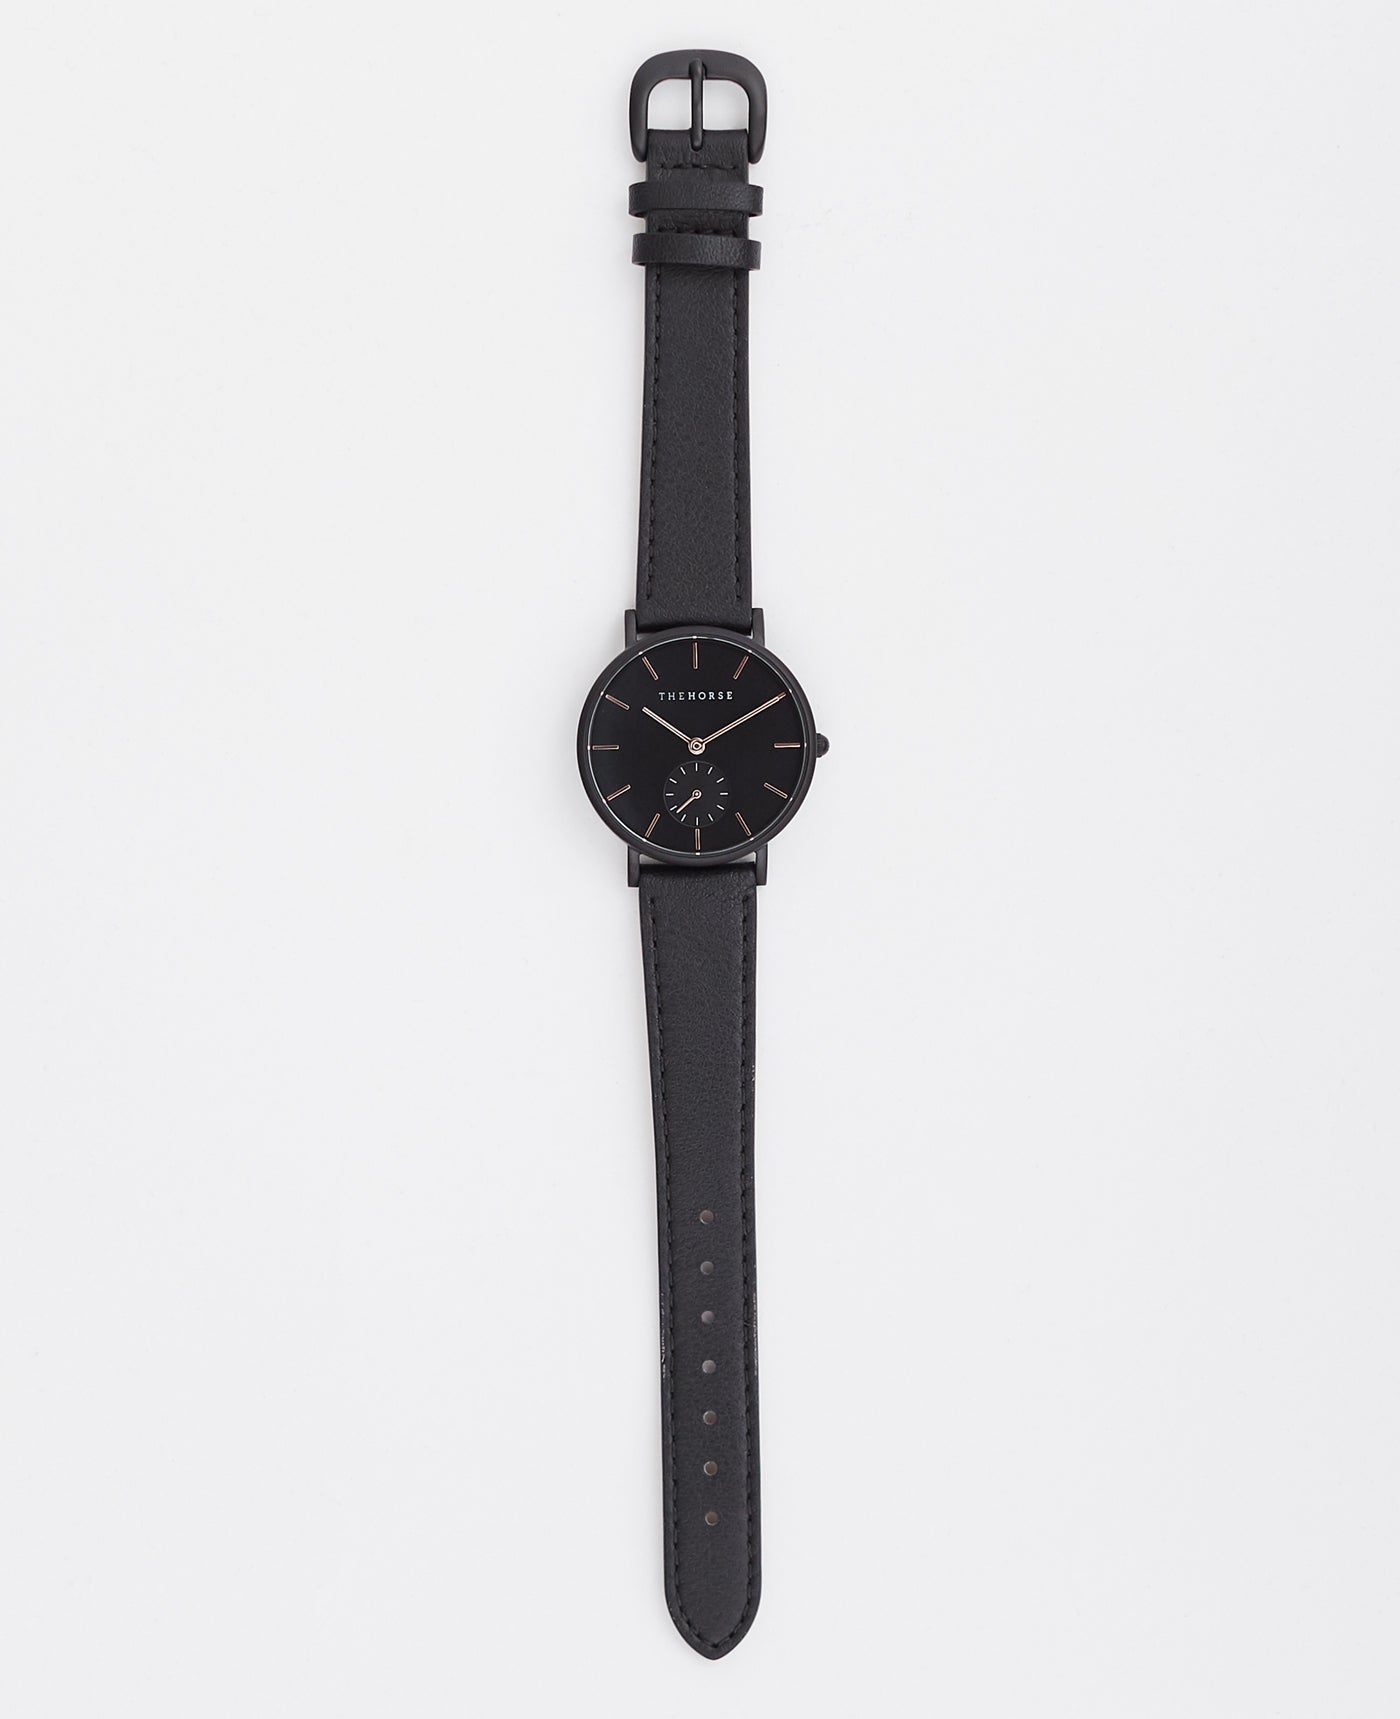 The Classic Watch in Matte Black Case / Black Dial / Black Leather Strap by The Horse